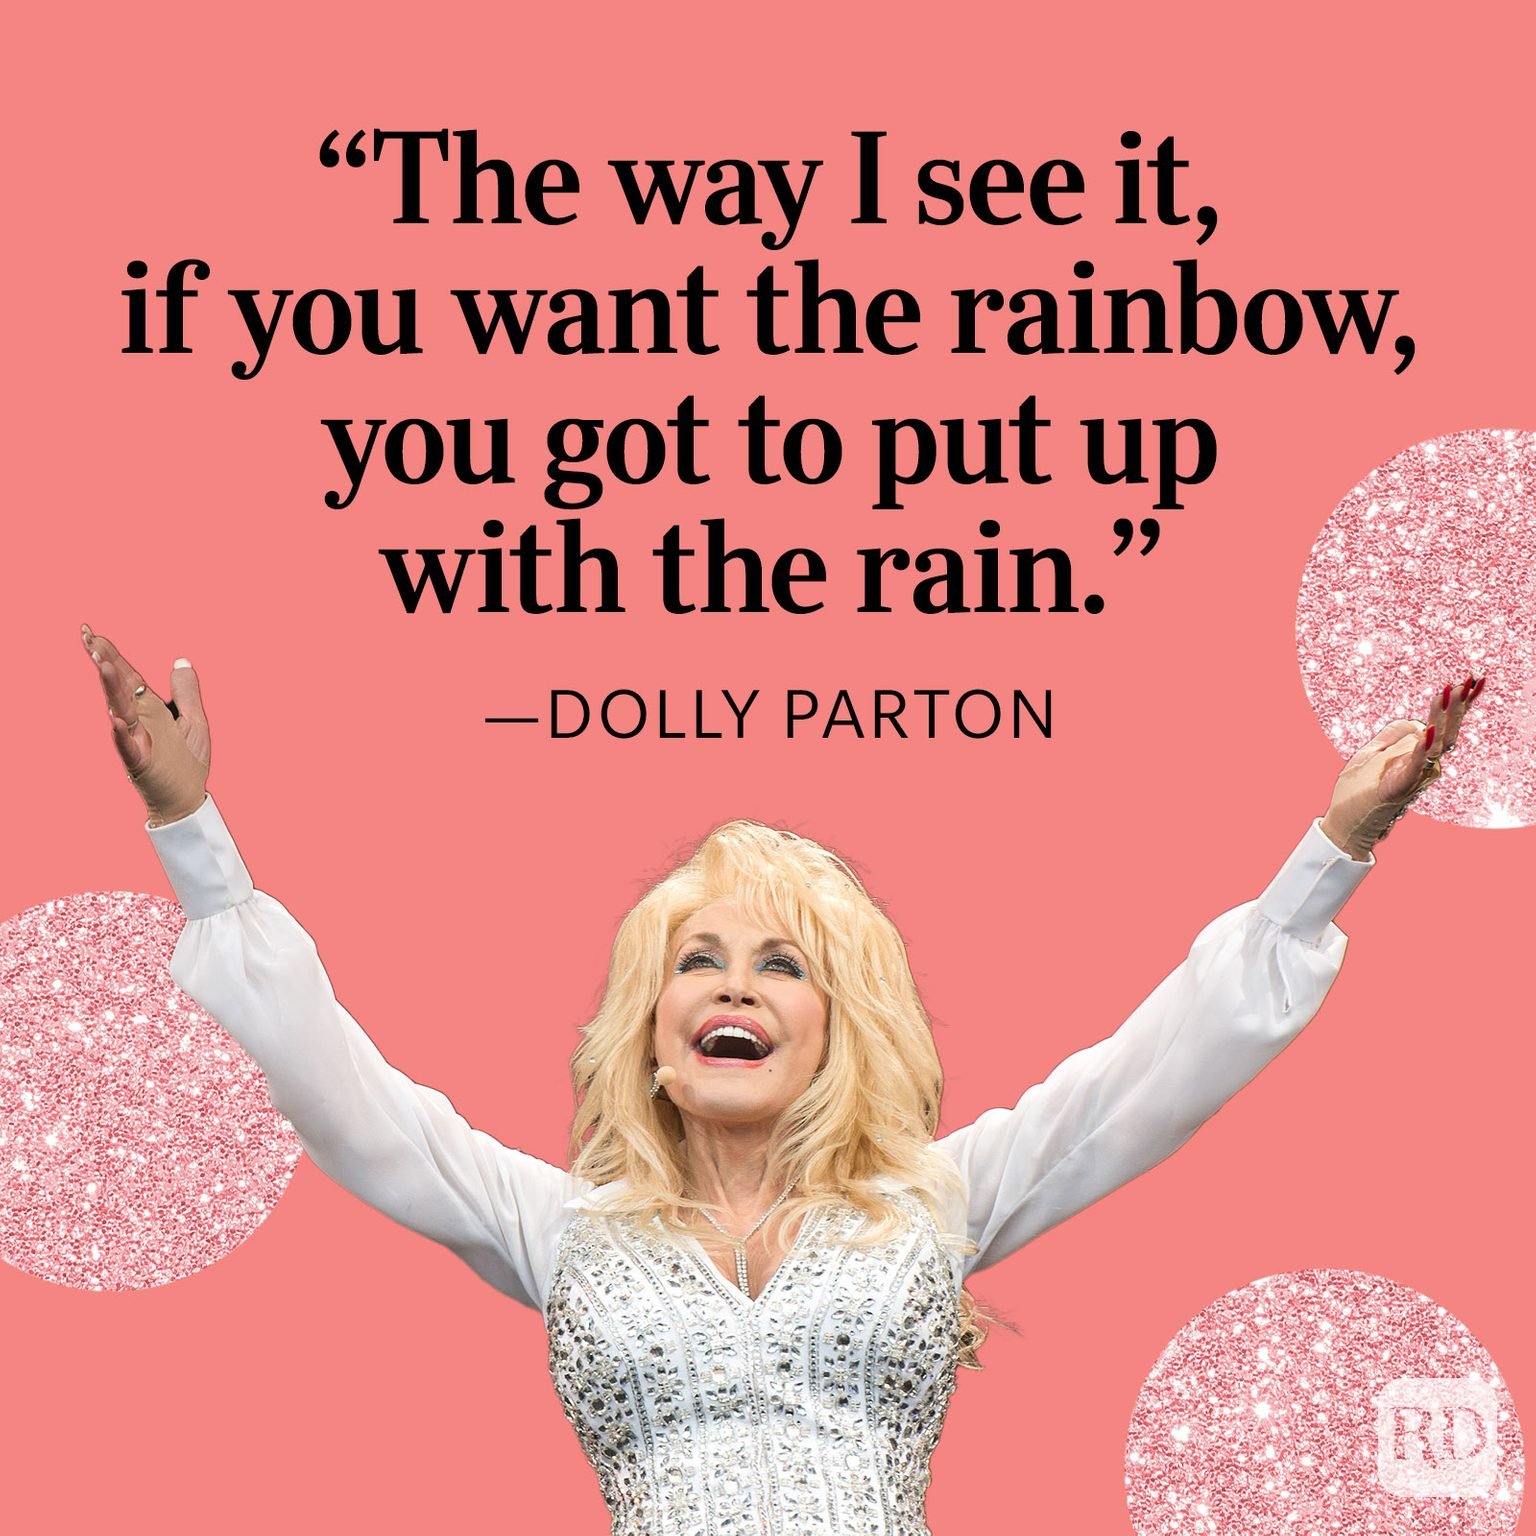 Dolly Parton Quotes Her Funniest And Most Inspiring Sayings Trusted